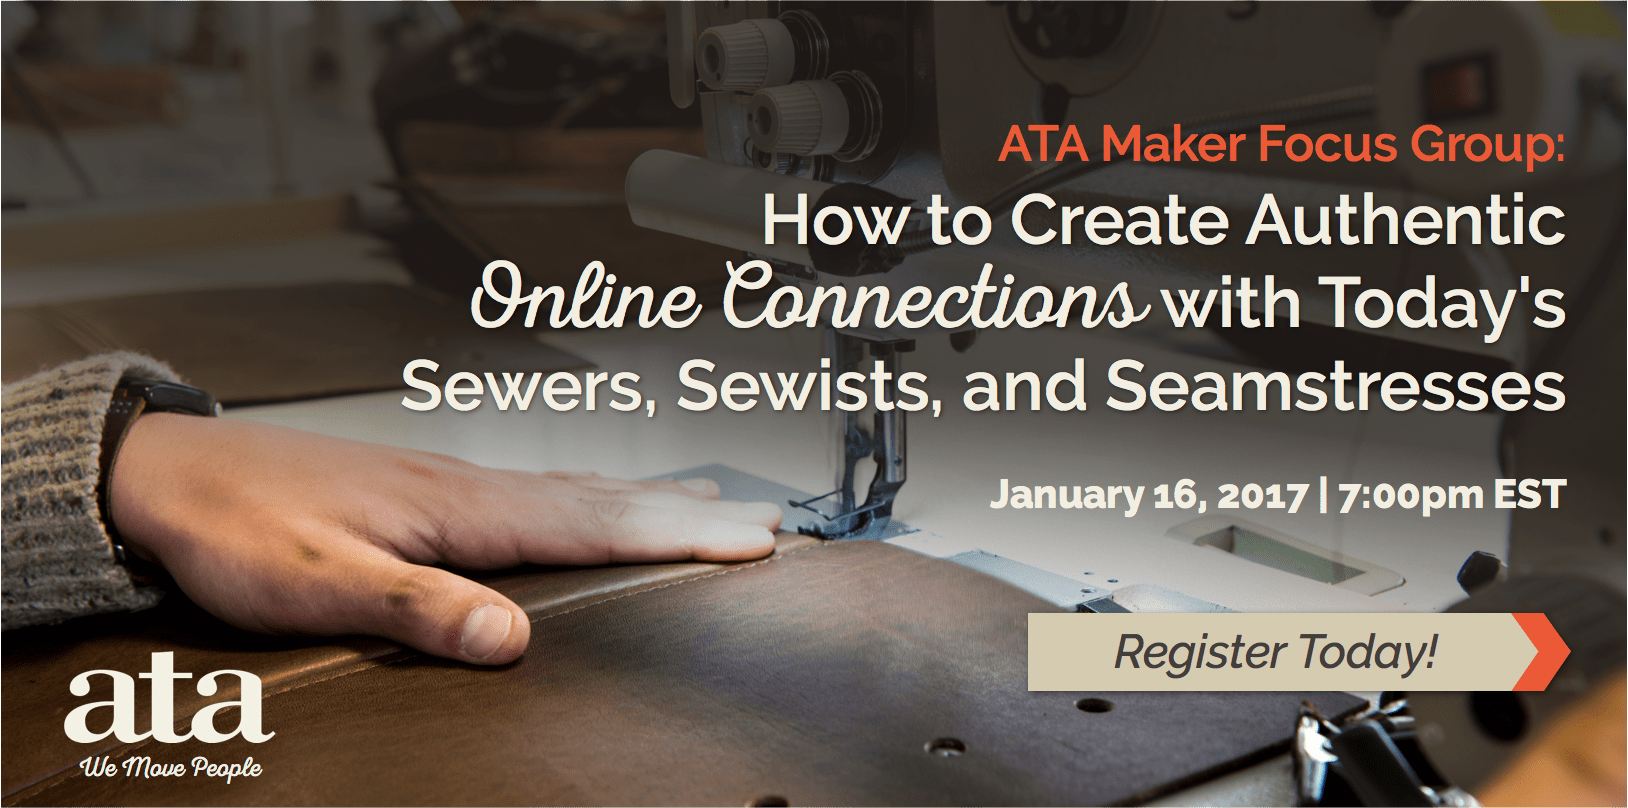 ATA Maker Focus Group: How to Create Authentic Online Connections with Today's Sewers, Sewists, and Seamstresses